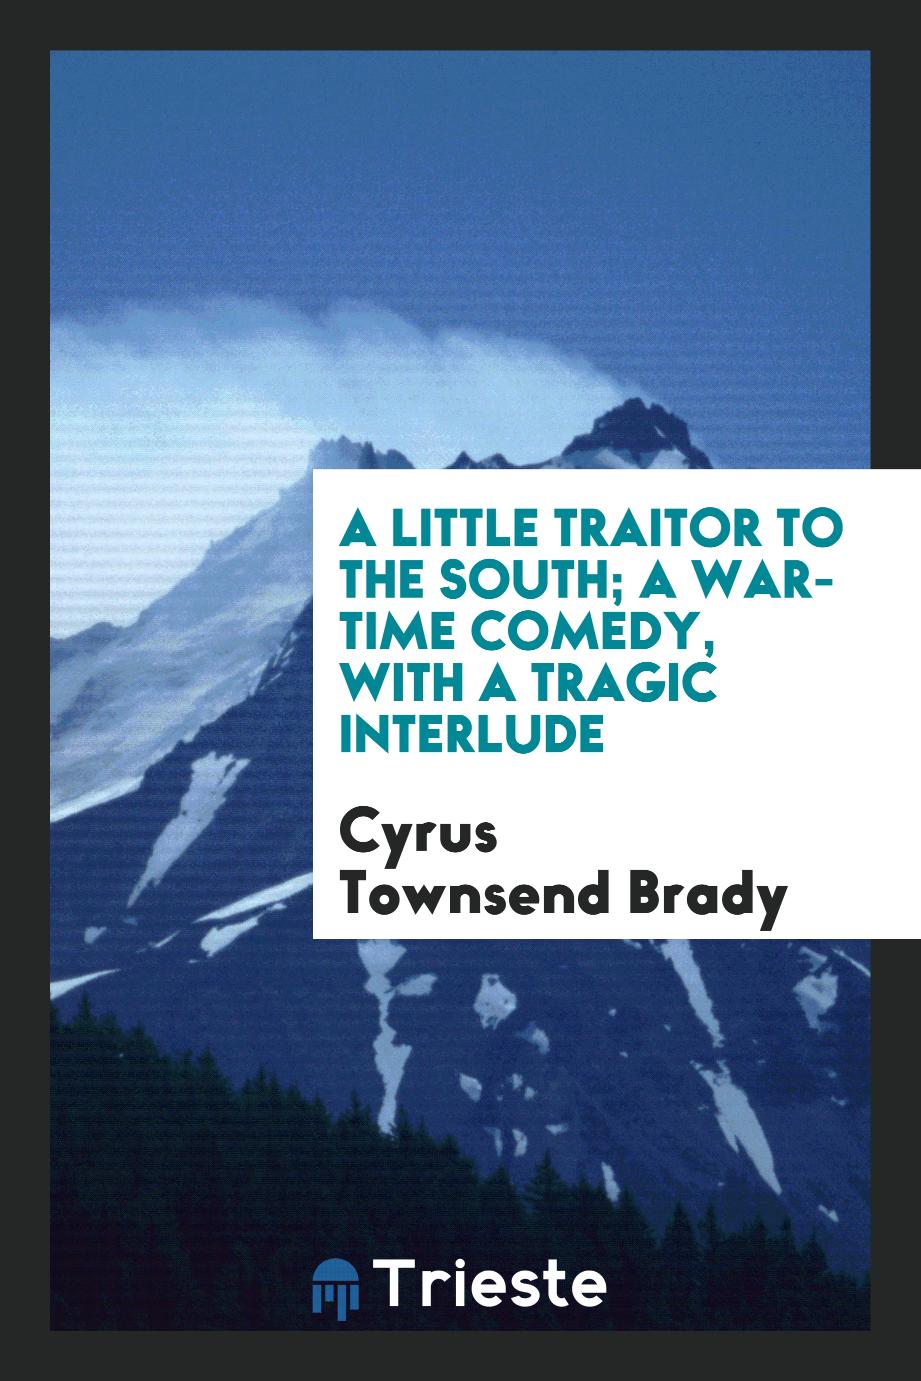 A little traitor to the South; a war-time comedy, with a tragic interlude